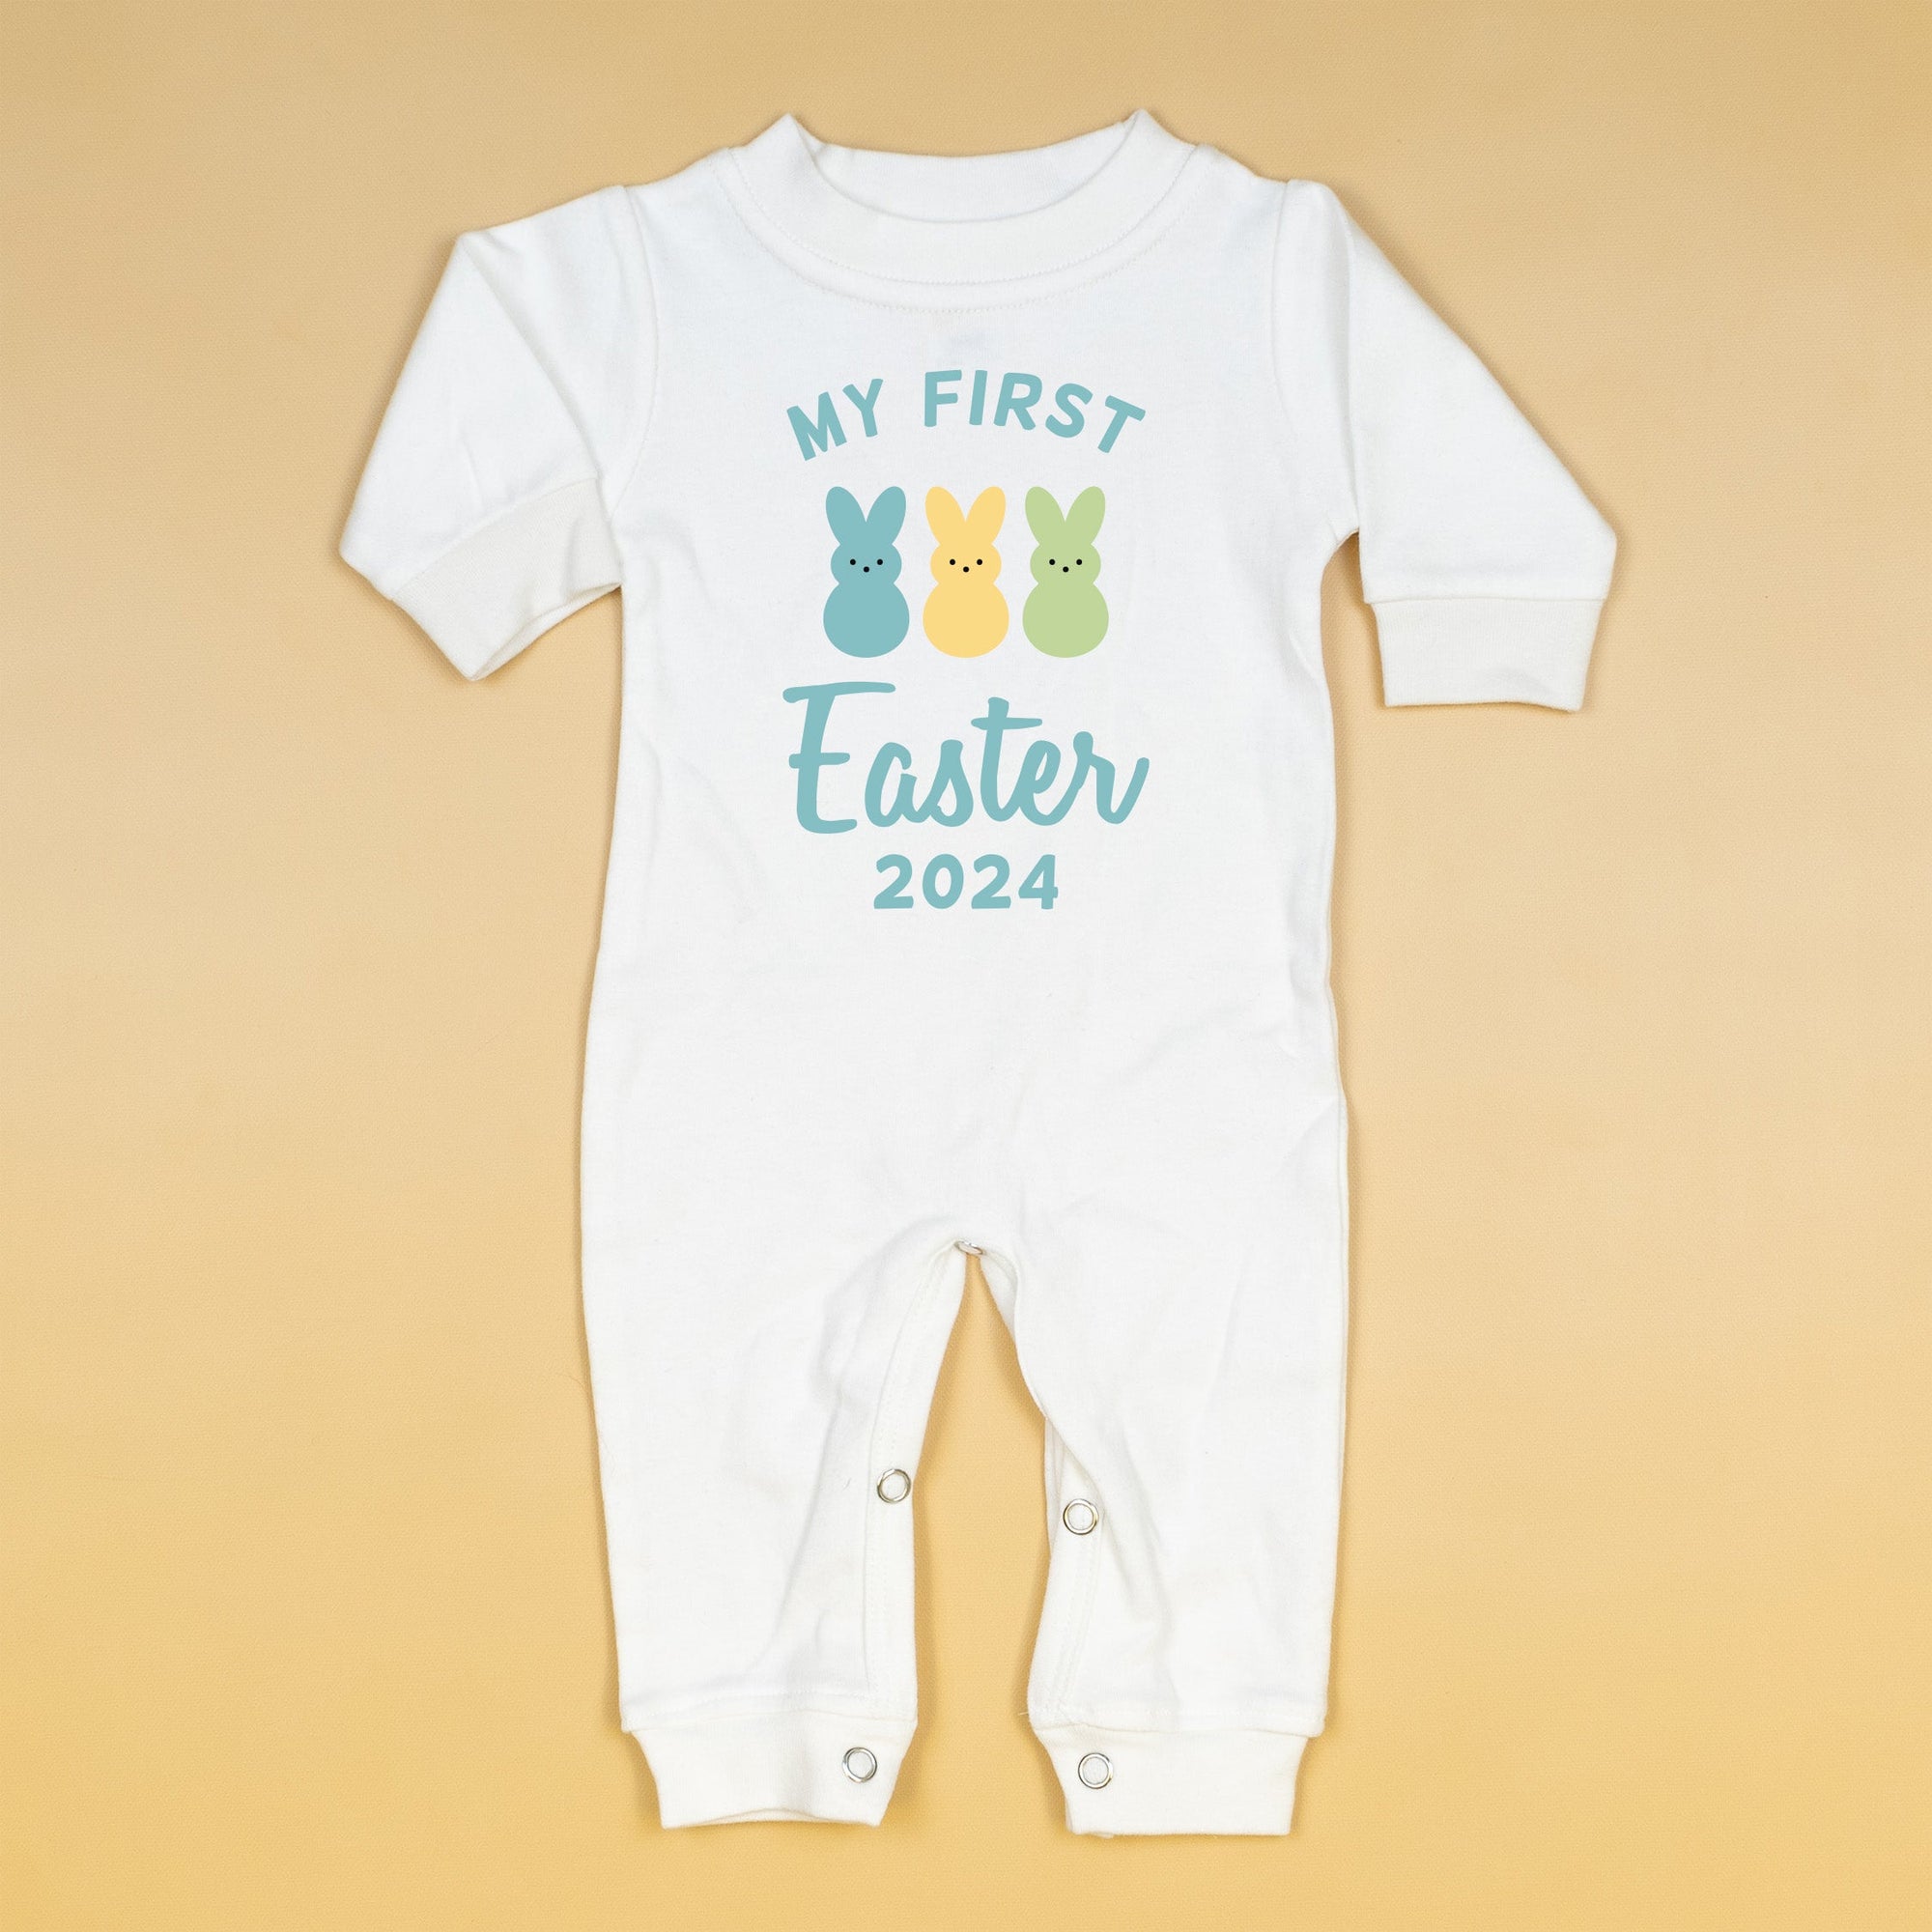 Cuddle Sleep Dream My First Easter w/ Marshmallow Bunnies | White Long Romper